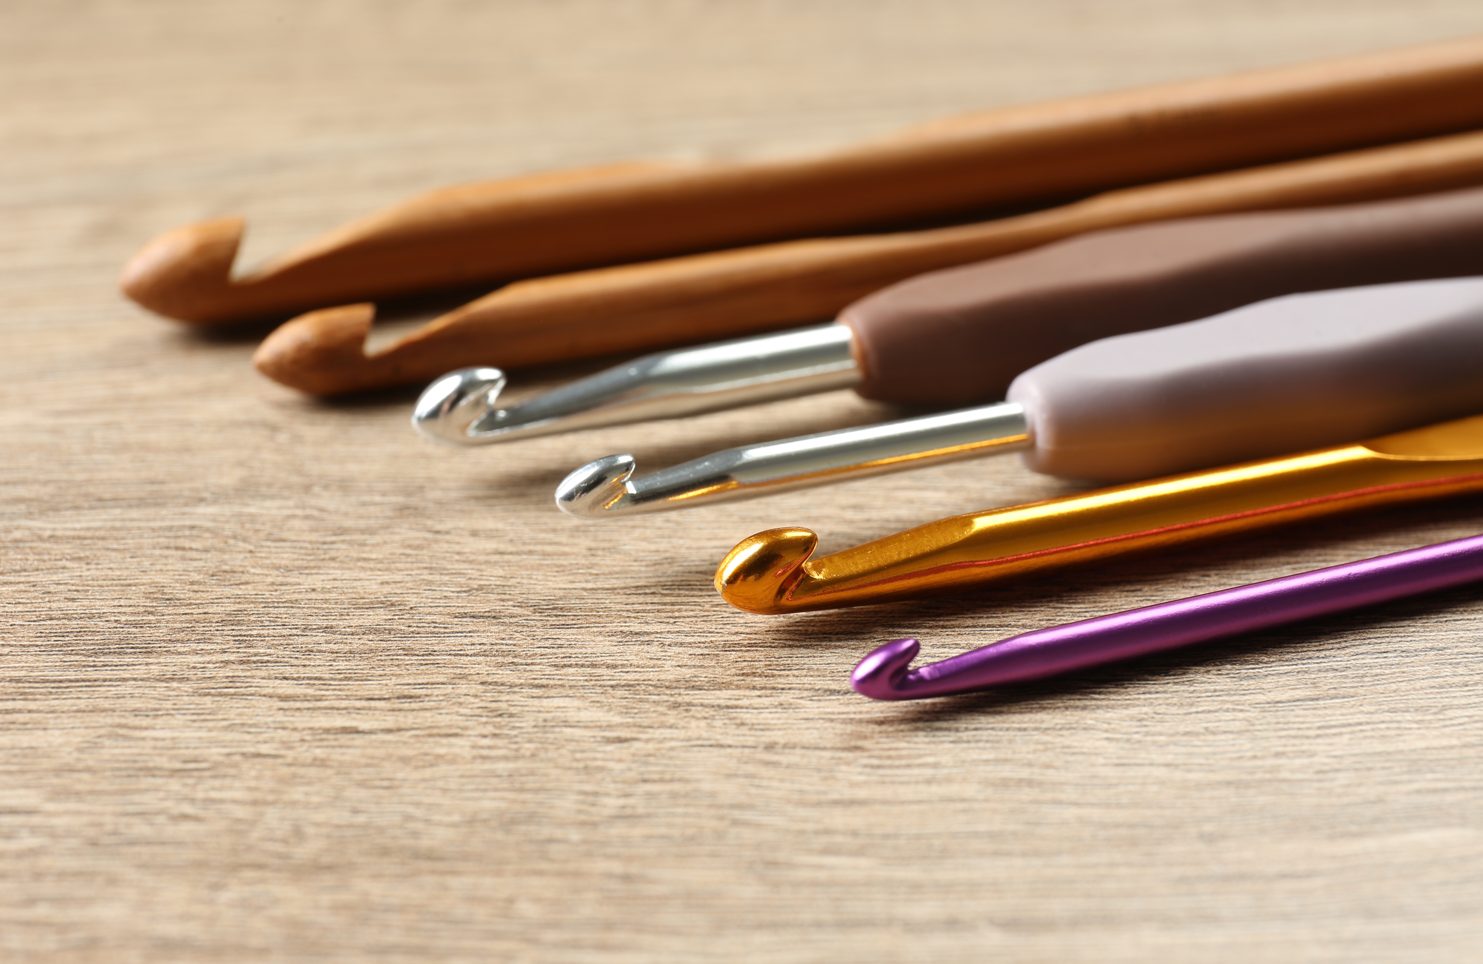 Types and Materials of Crochet Hooks